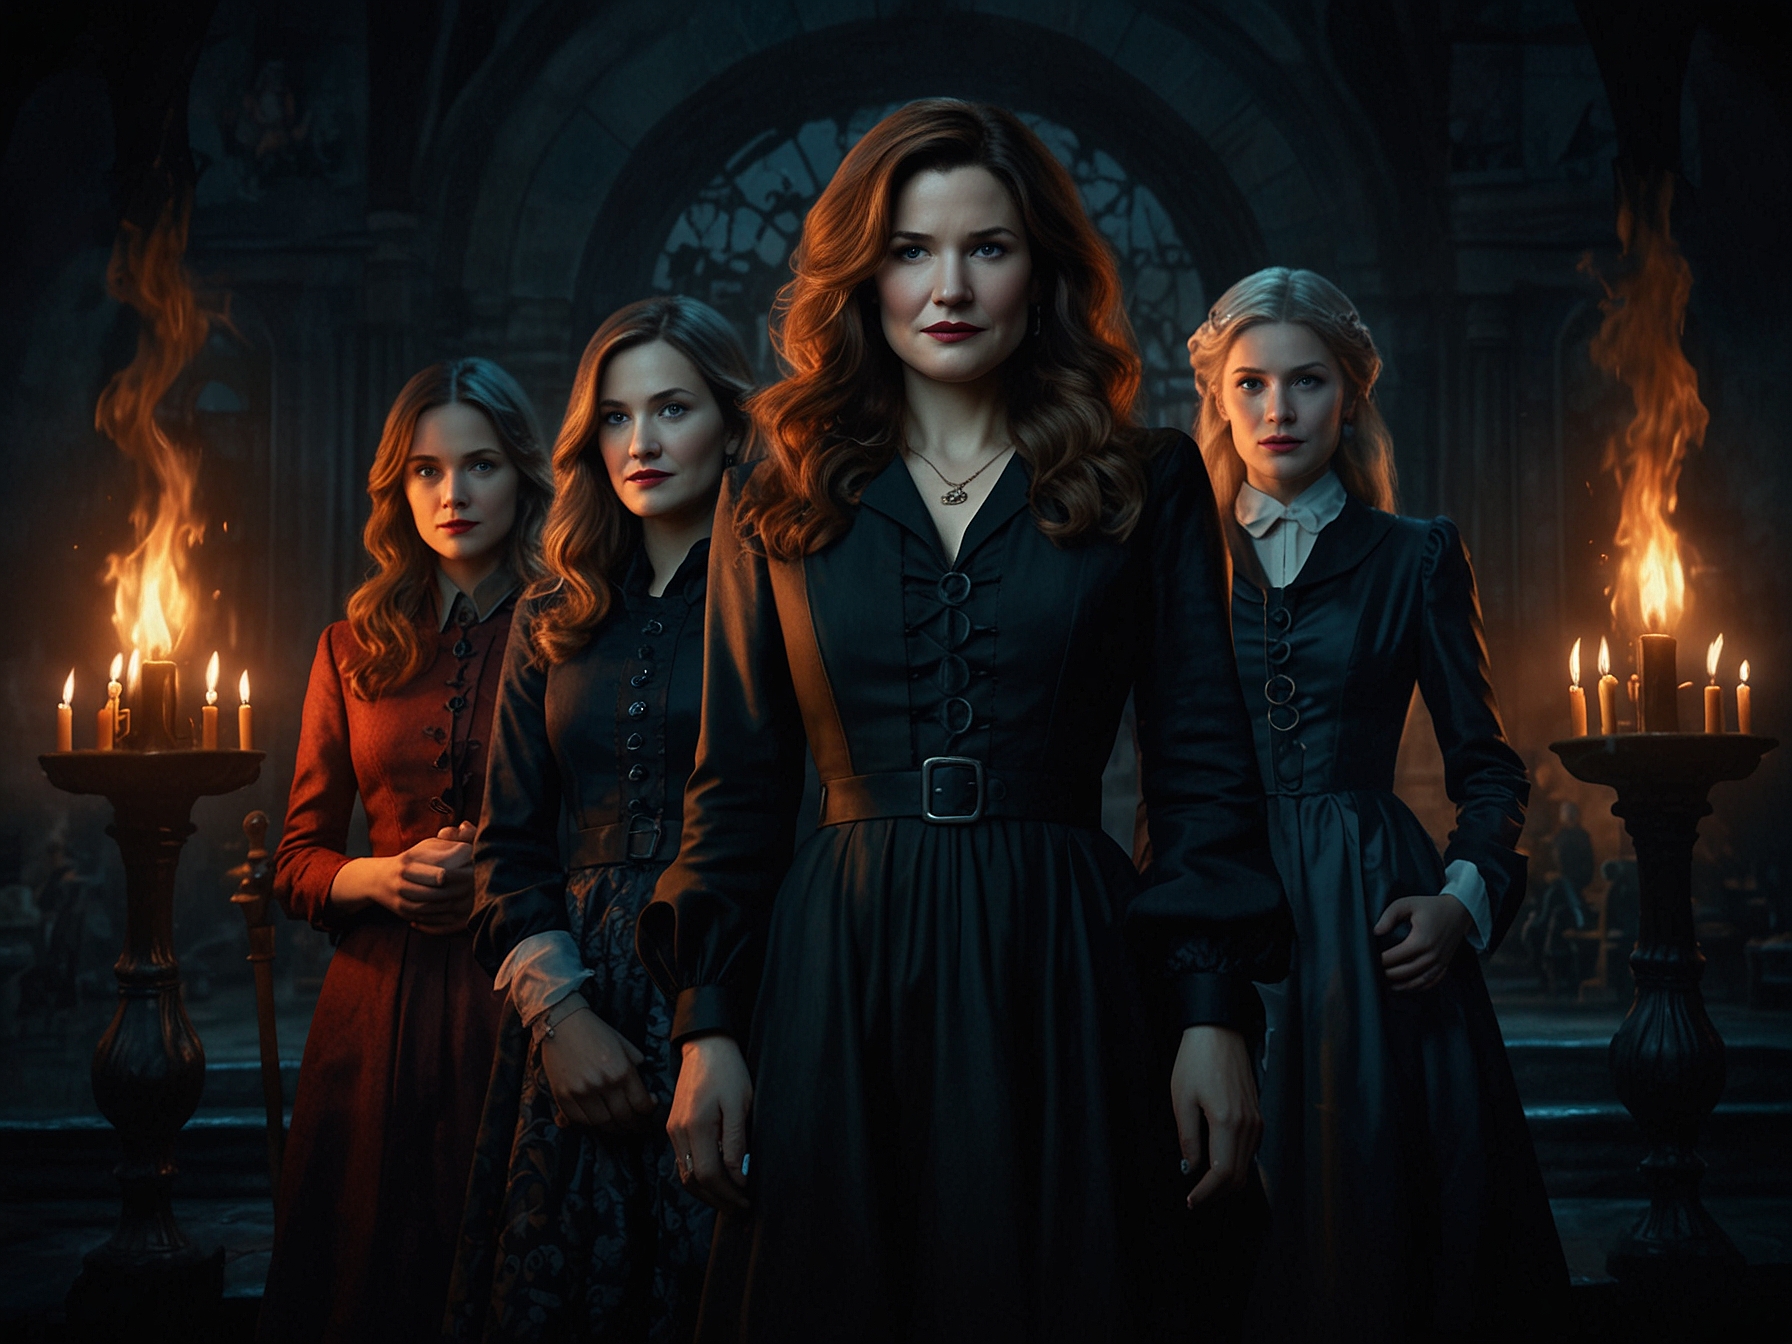 Kathryn Hahn as Agatha Harkness stands among a diverse group of witches in dark, intricate costumes. The image sets a mysterious tone, hinting at their unique abilities and backstories.